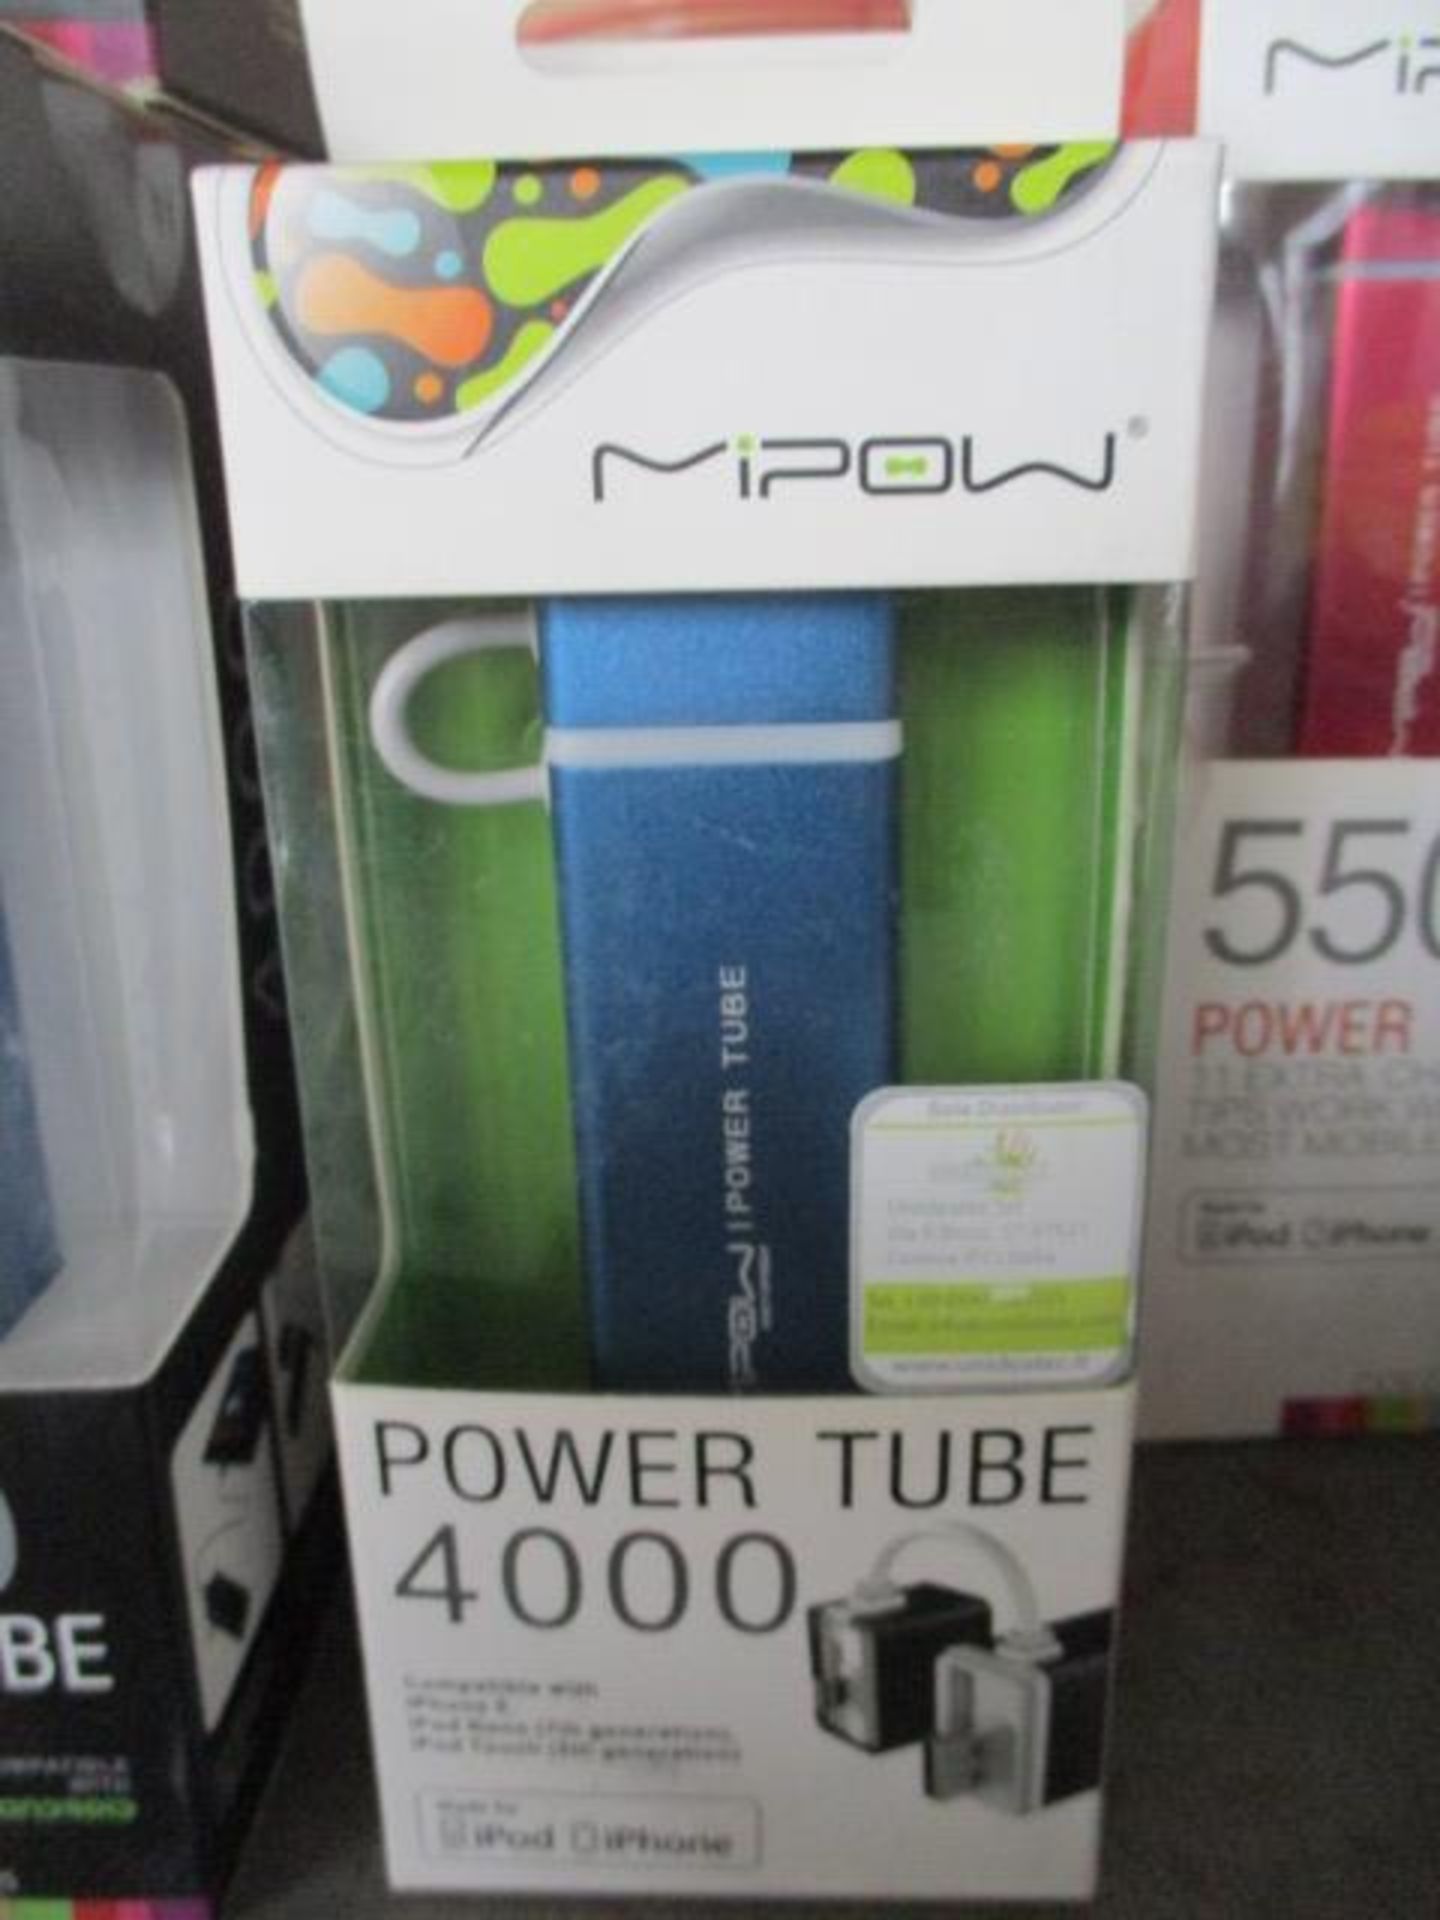 MiPow 4000Mah Power Tube recharger unit - Premium quality new and unused - rrp £49 + - comes comple